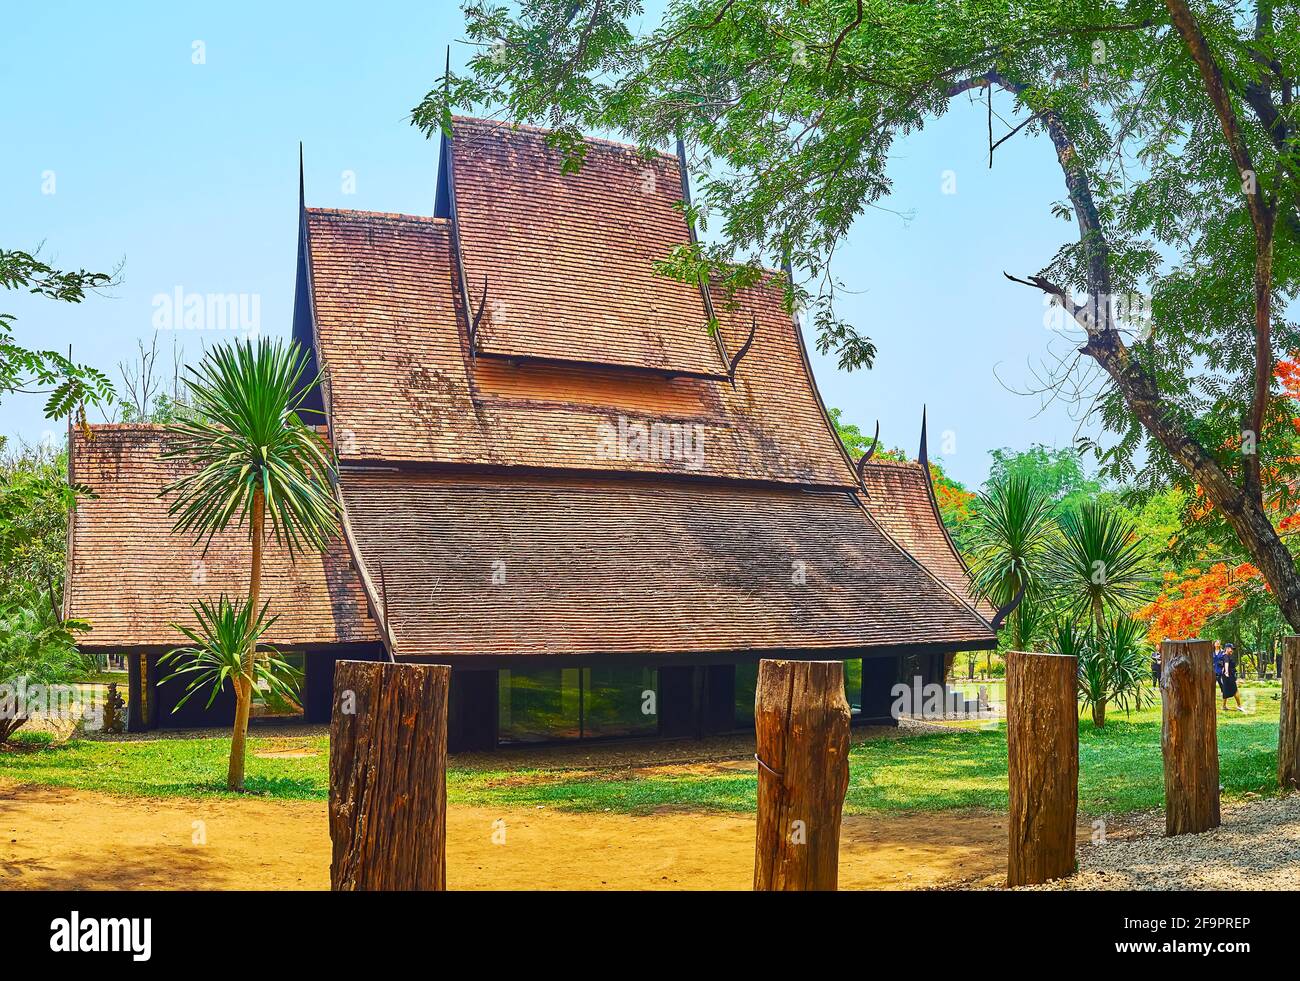 CHIANG RAI, THAILAND - MAY 11, 2019: The Cottage of Time with the scenic gable (pyathat) roof on grounds of Black House (Baan Dam) Museum, on May 11 i Stock Photo